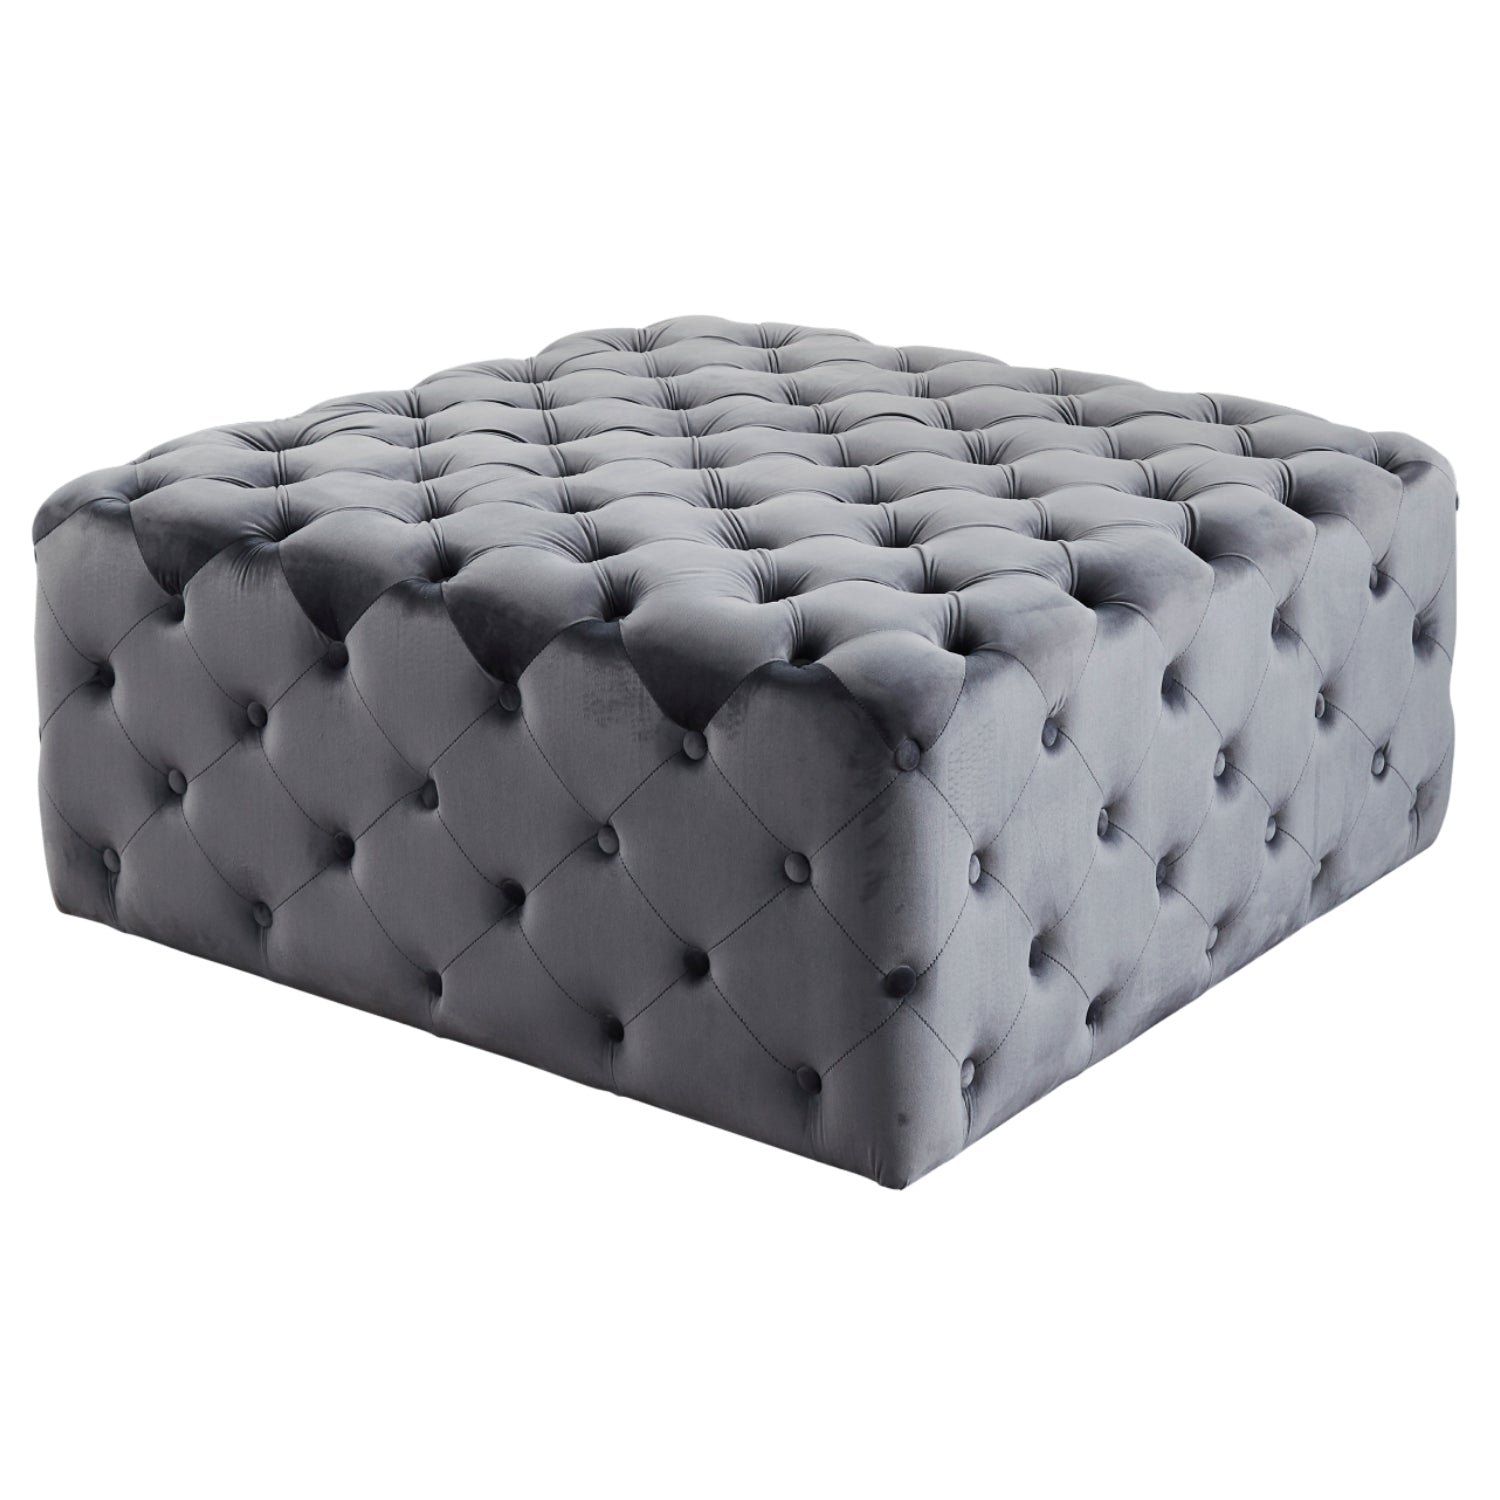 Button grey cocktail ottoman by Native